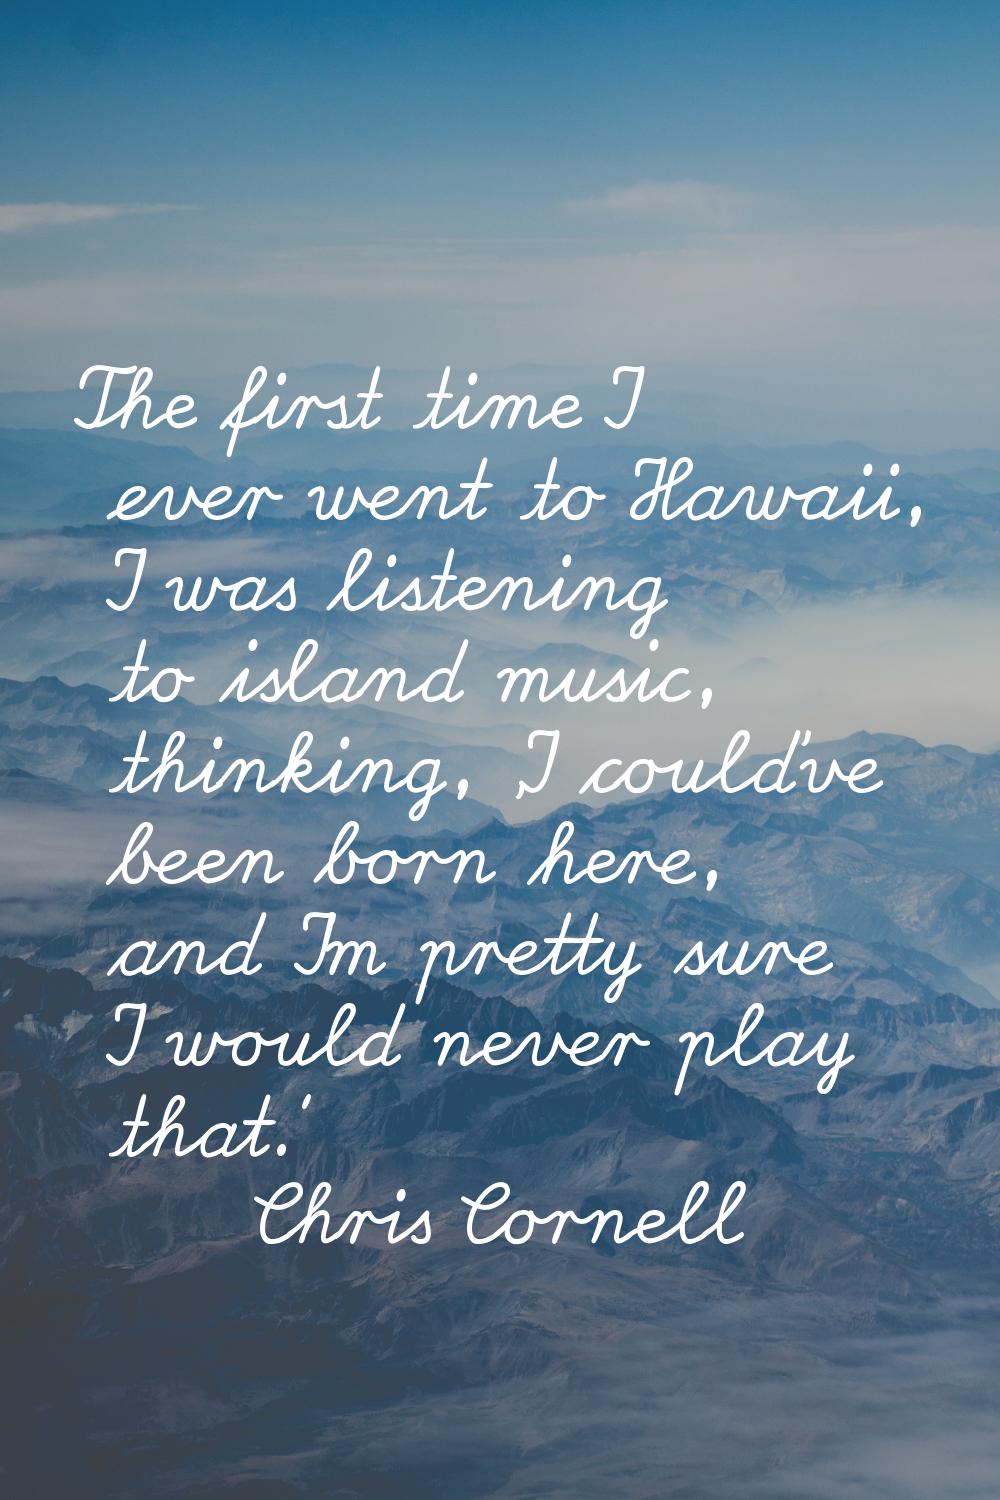 The first time I ever went to Hawaii, I was listening to island music, thinking, 'I could've been b